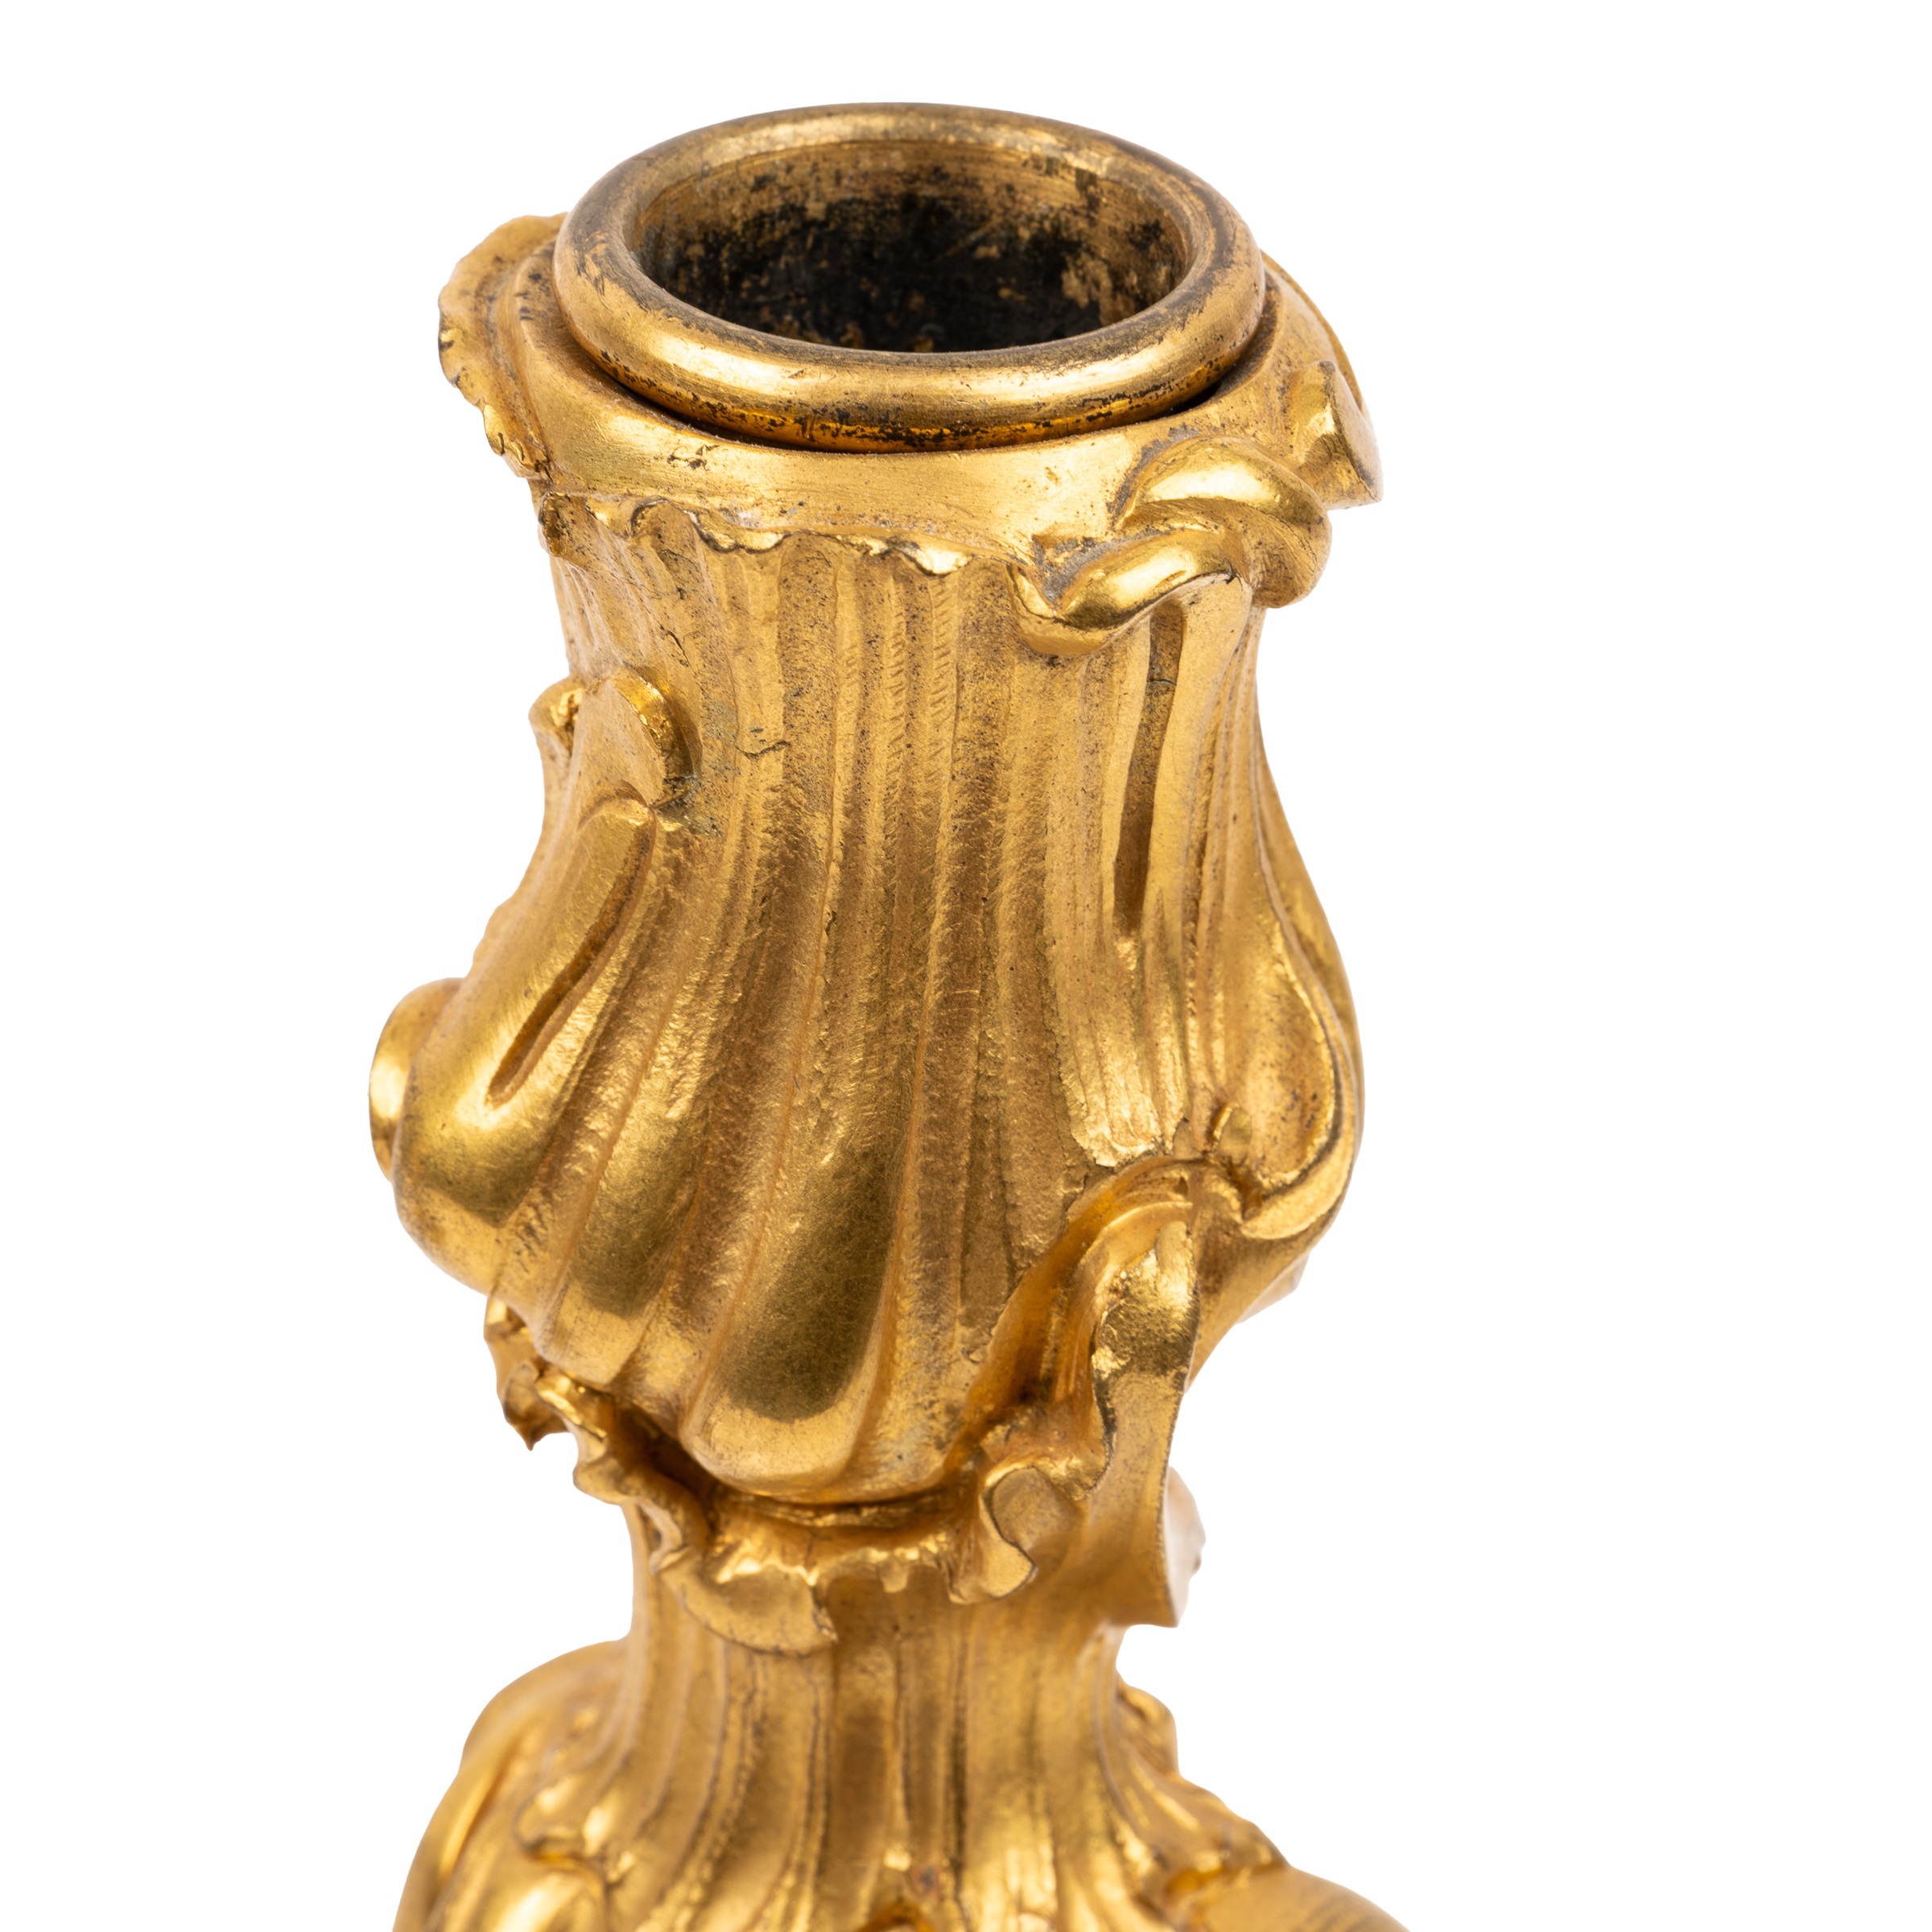 A pair of 19th century French ormolu Rococo style candle sticks - Image 2 of 2